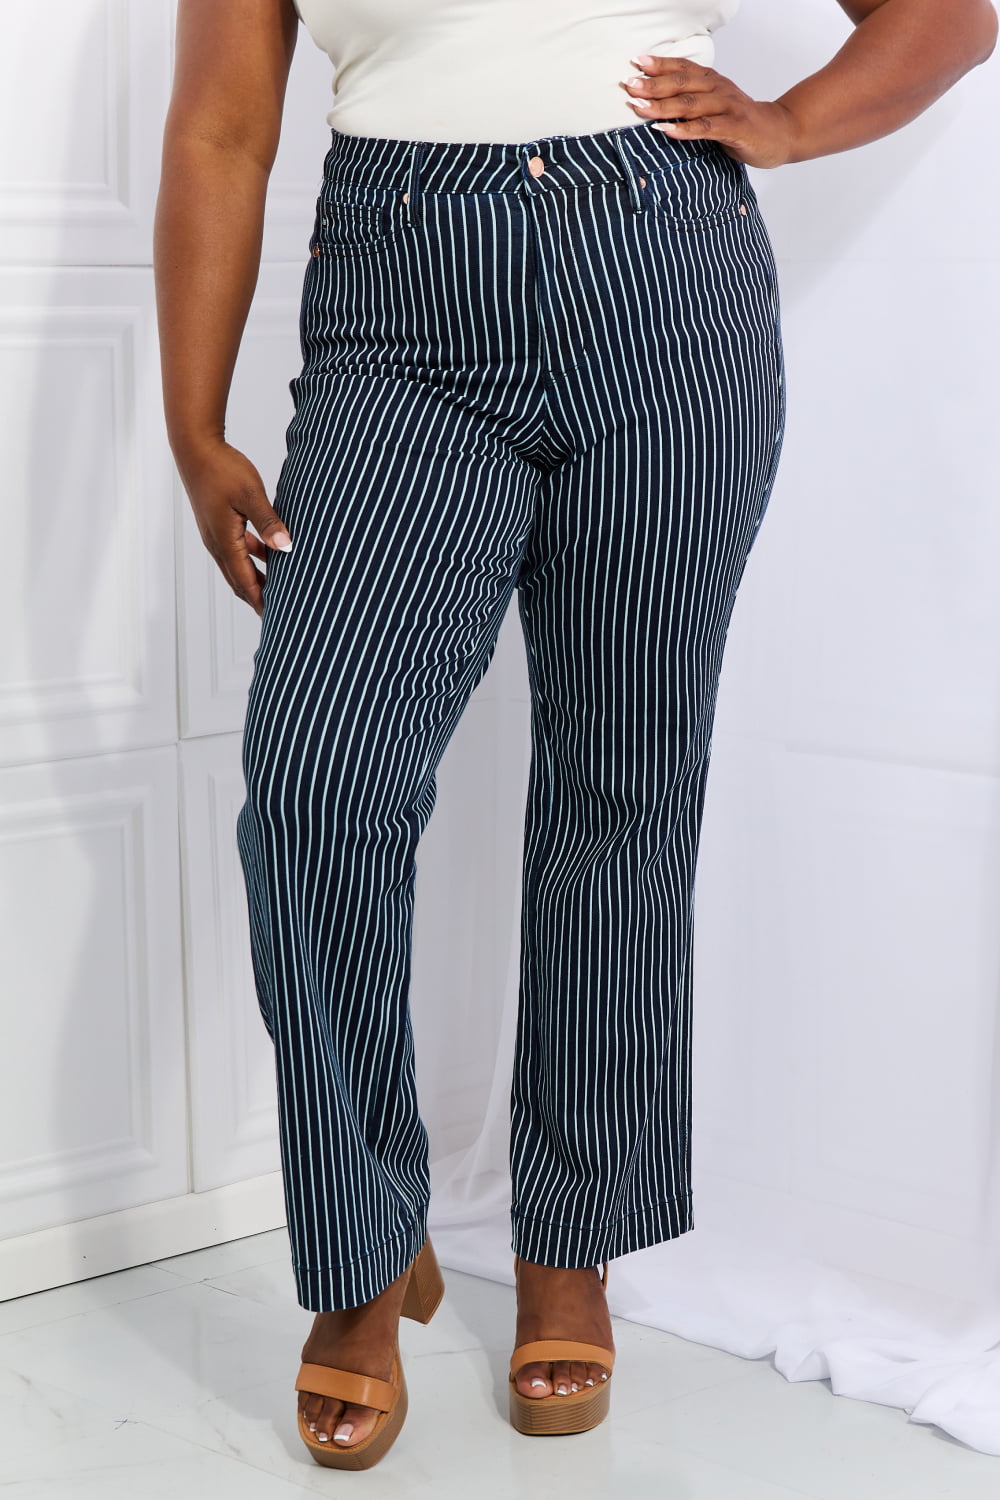 High Waisted Striped Jeans With Tummy Control